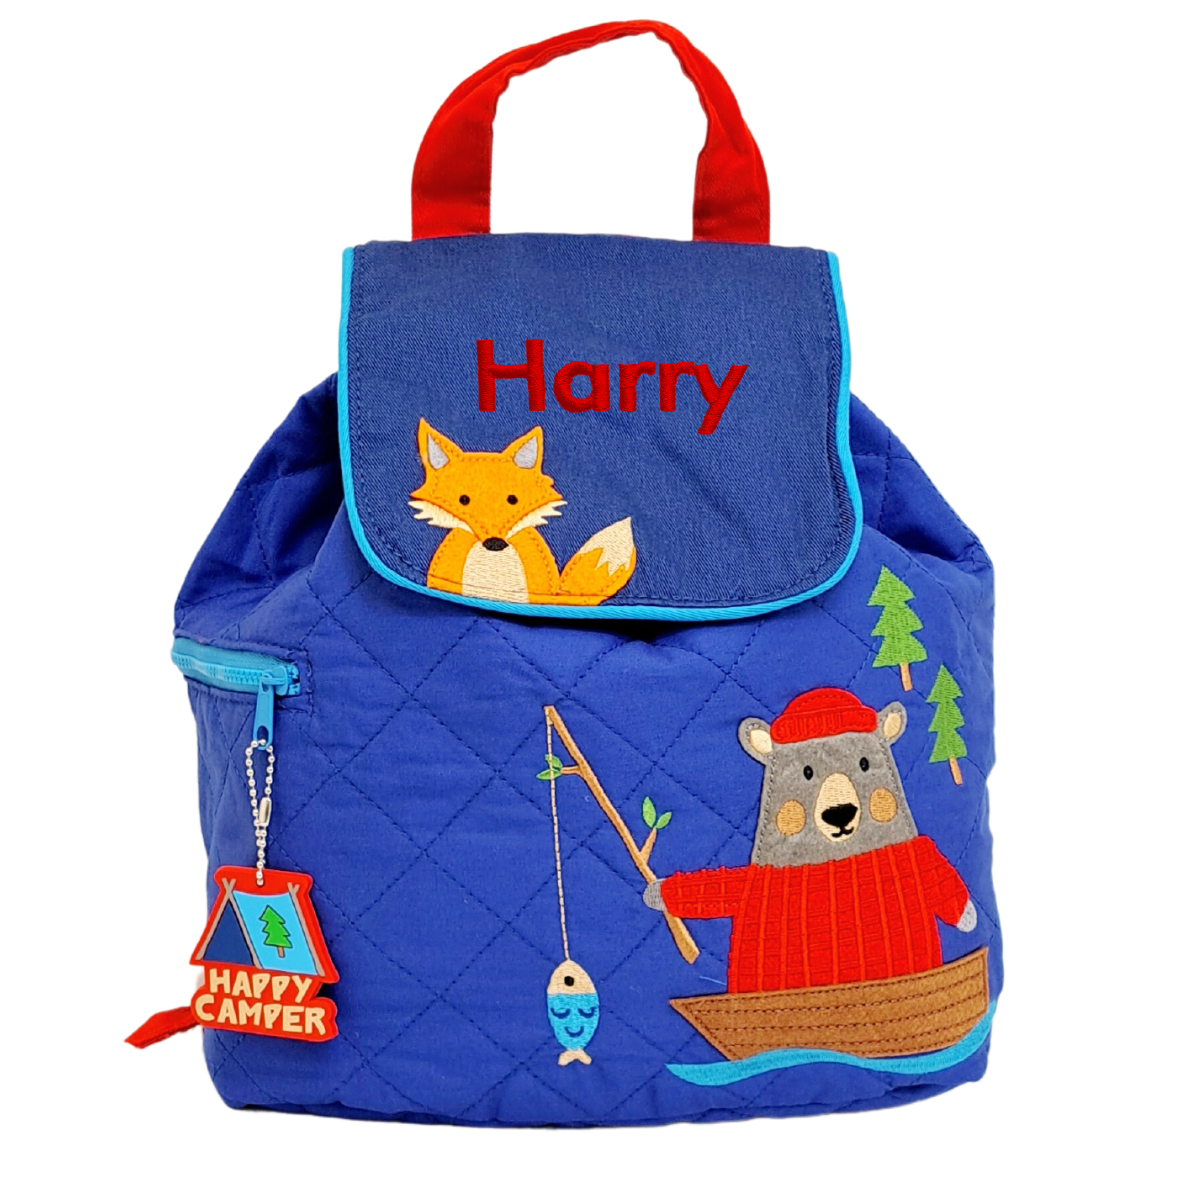 Image of a Stephen Joseph quilted back pack. The main body of the bag is mid blue and it has an appliqued bear in a boat with a red hat and jumper, fishing. The flap of the back is a darker blue with an appliqued fox on it. The bag can be personalised with a name which will be embroidered onto the flap of the bag.